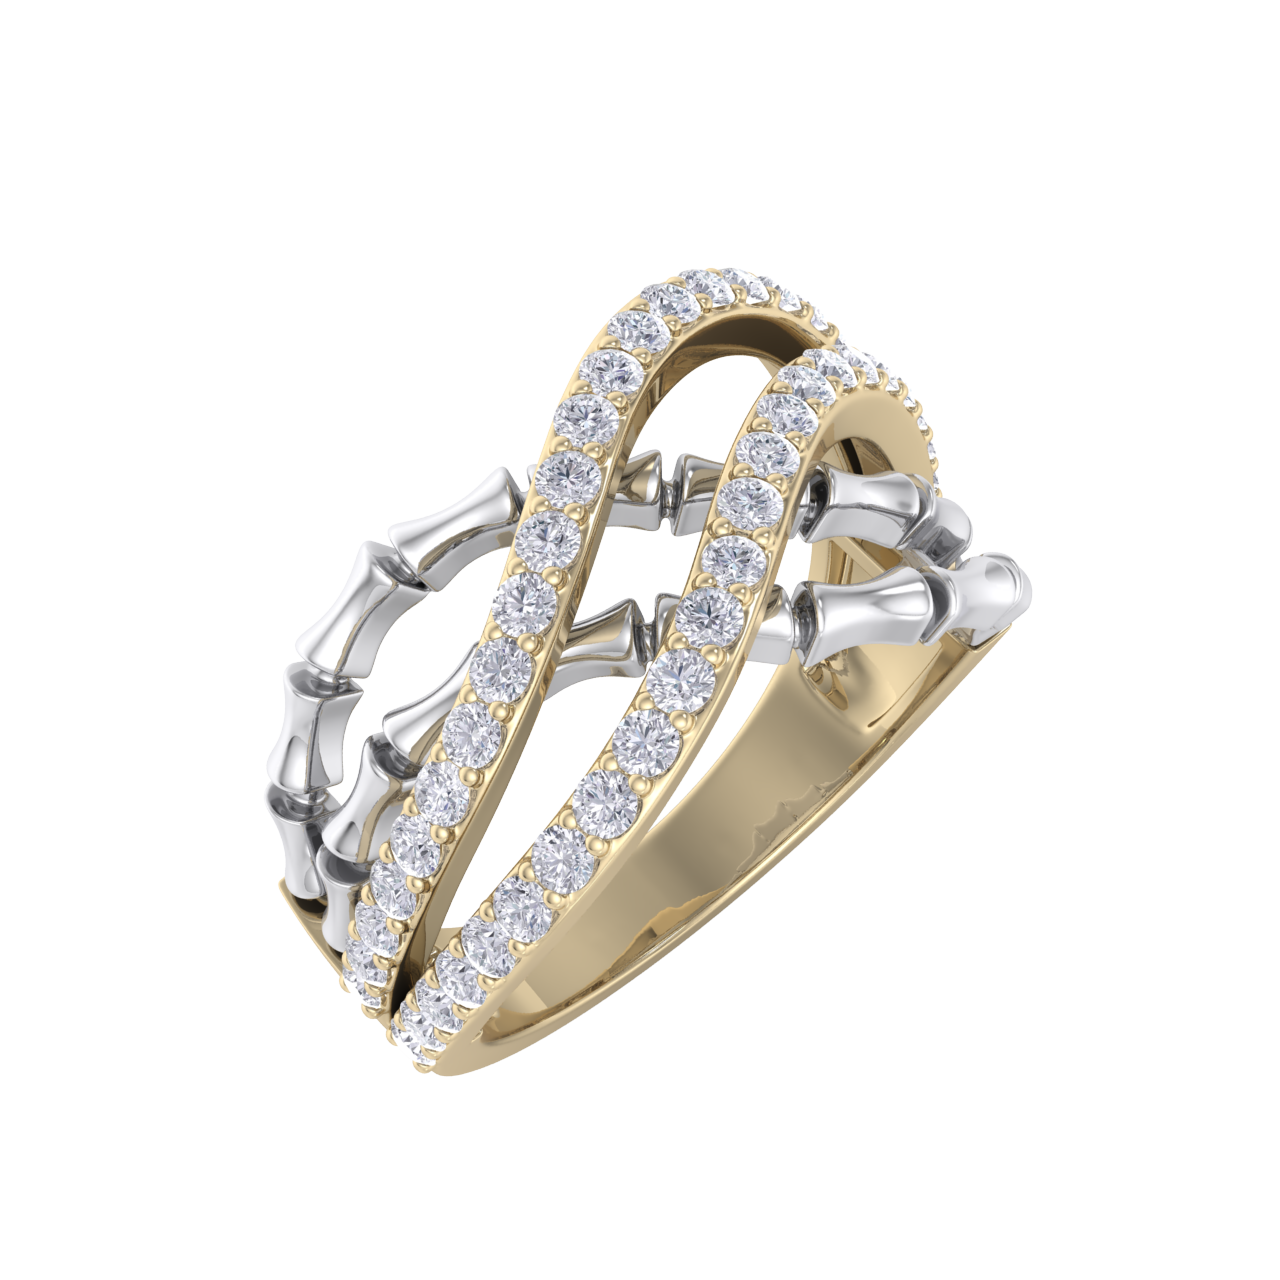 Beautiful ring in white gold with white diamonds of 0.50 ct in weight